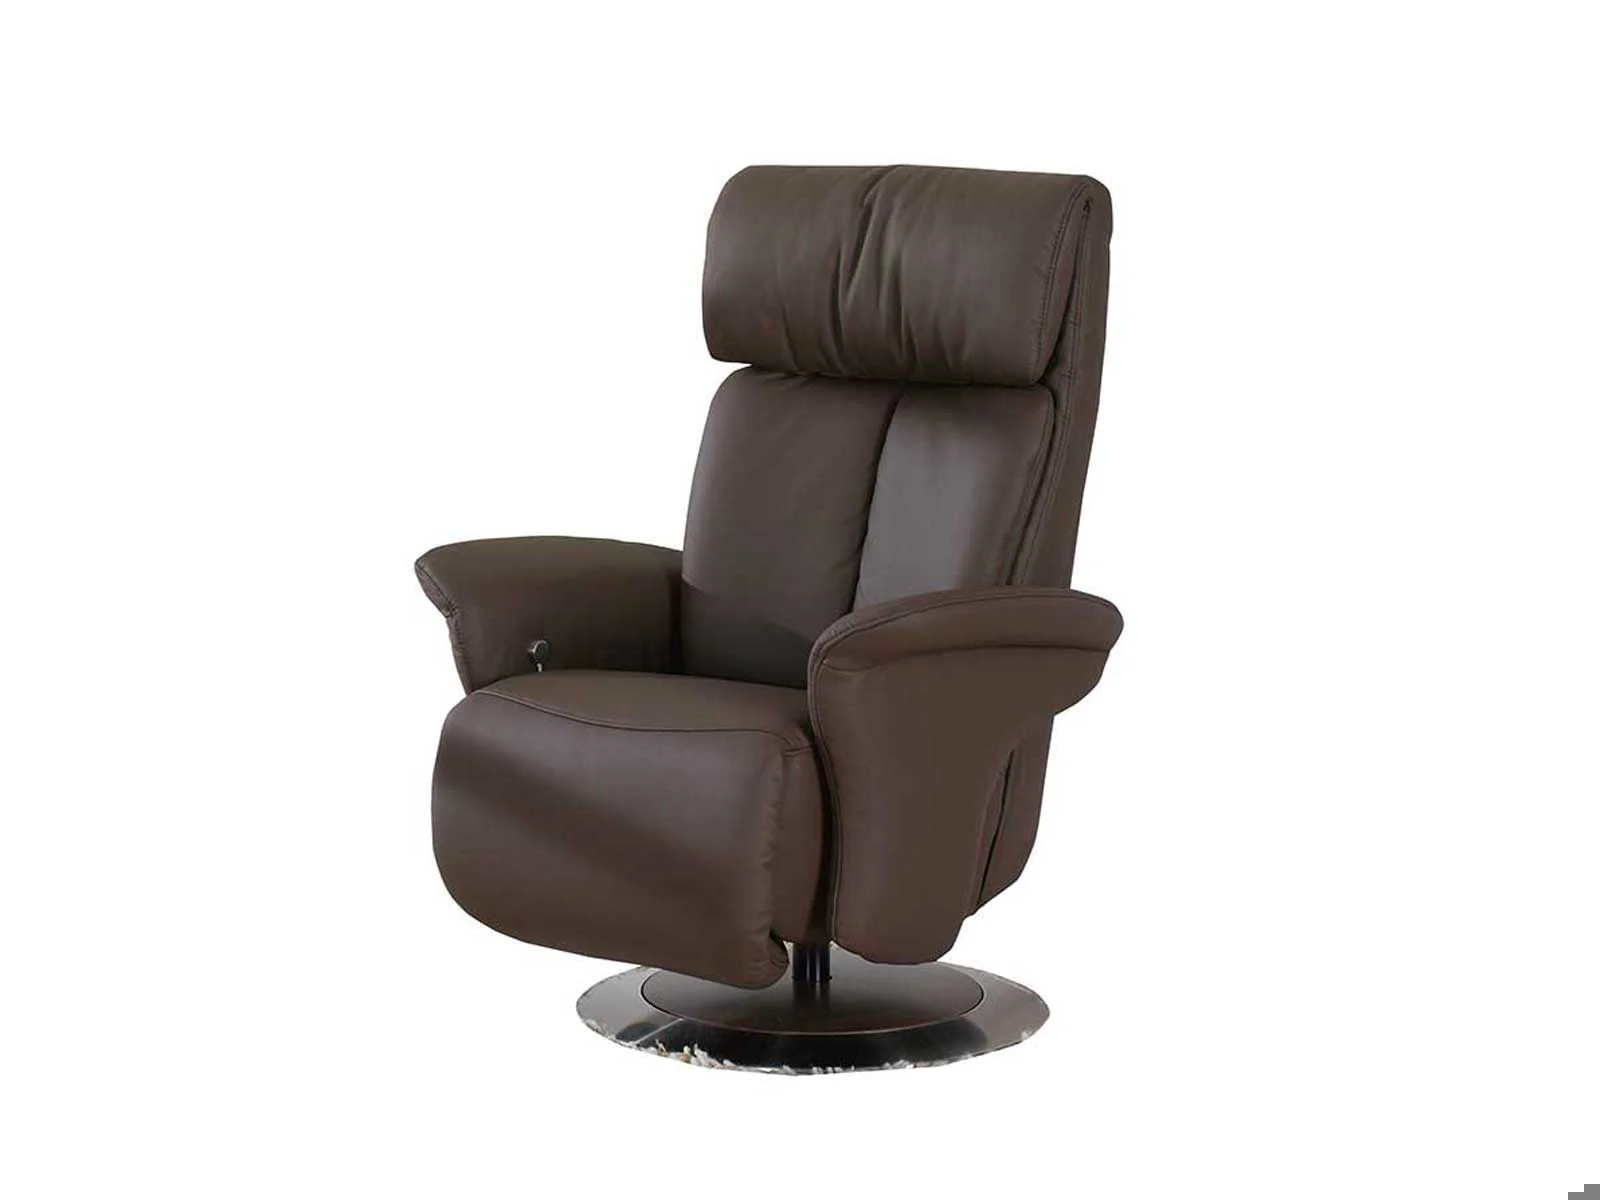 Small Manual Relaxer Chair